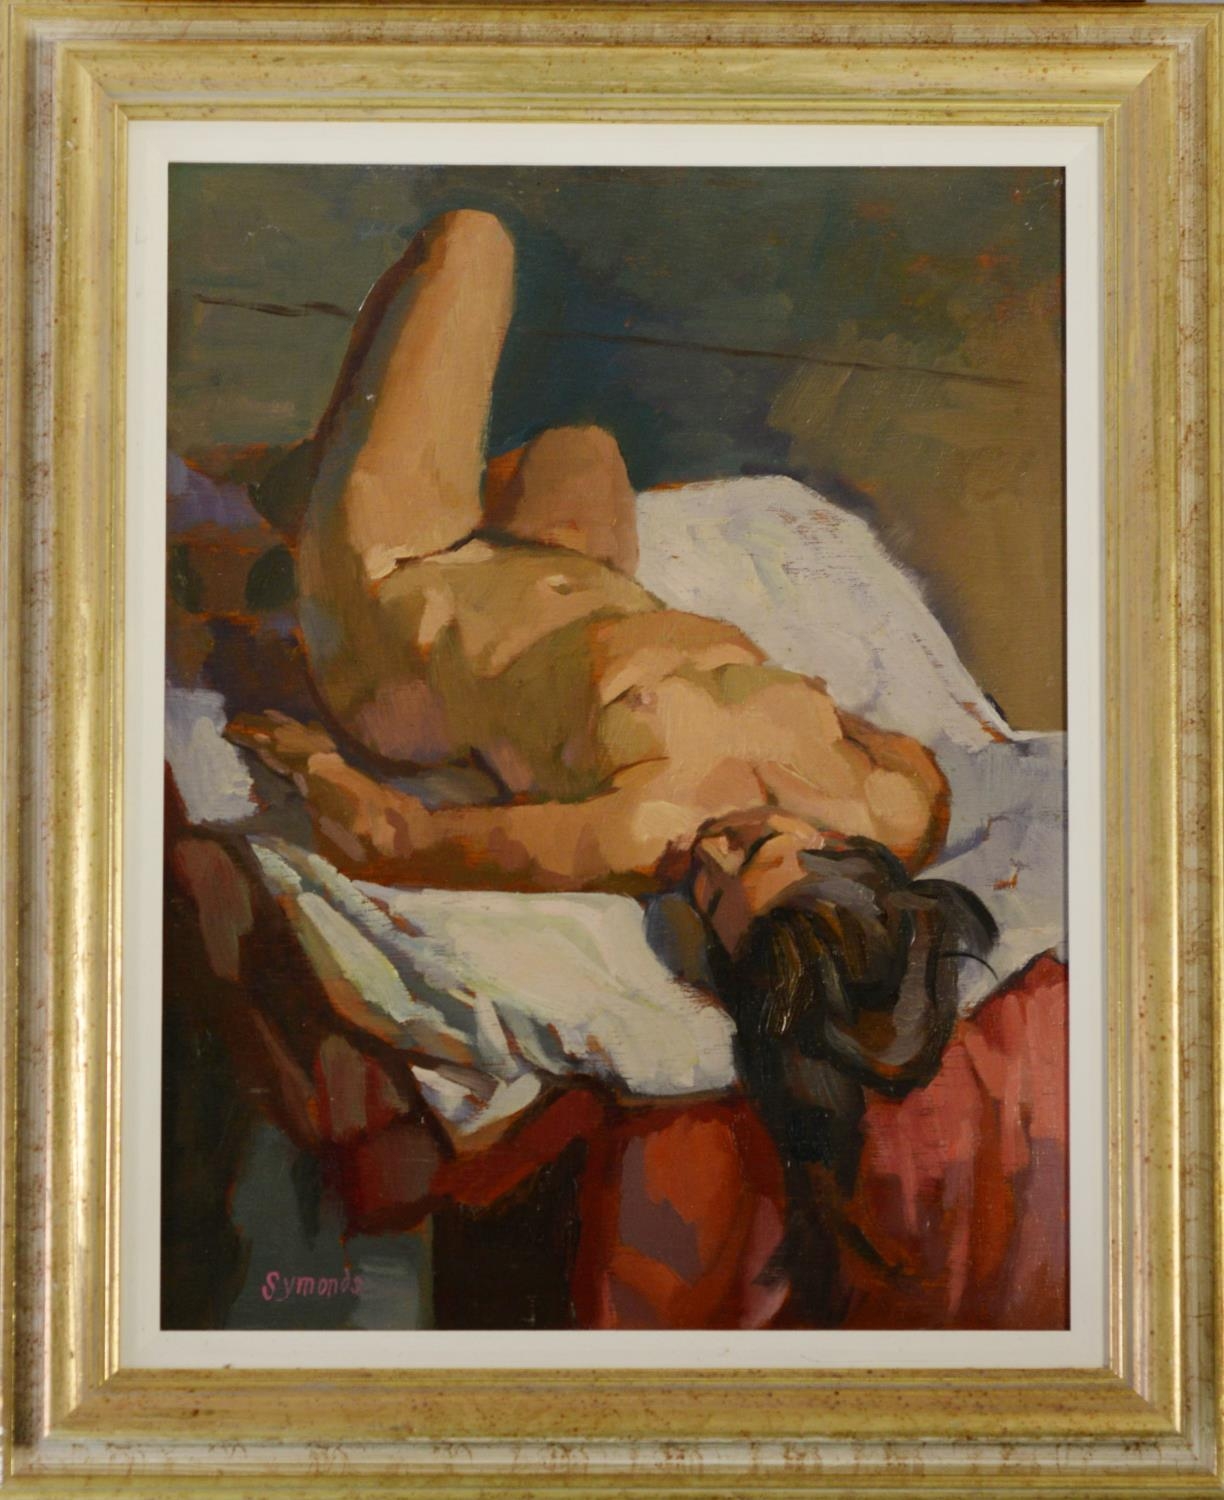 KEN SYMONDS (1927-2010) OIL ON BOARD ‘Nude Asleep’ Signed, titled to piece of hardboard stuck to the - Image 2 of 3